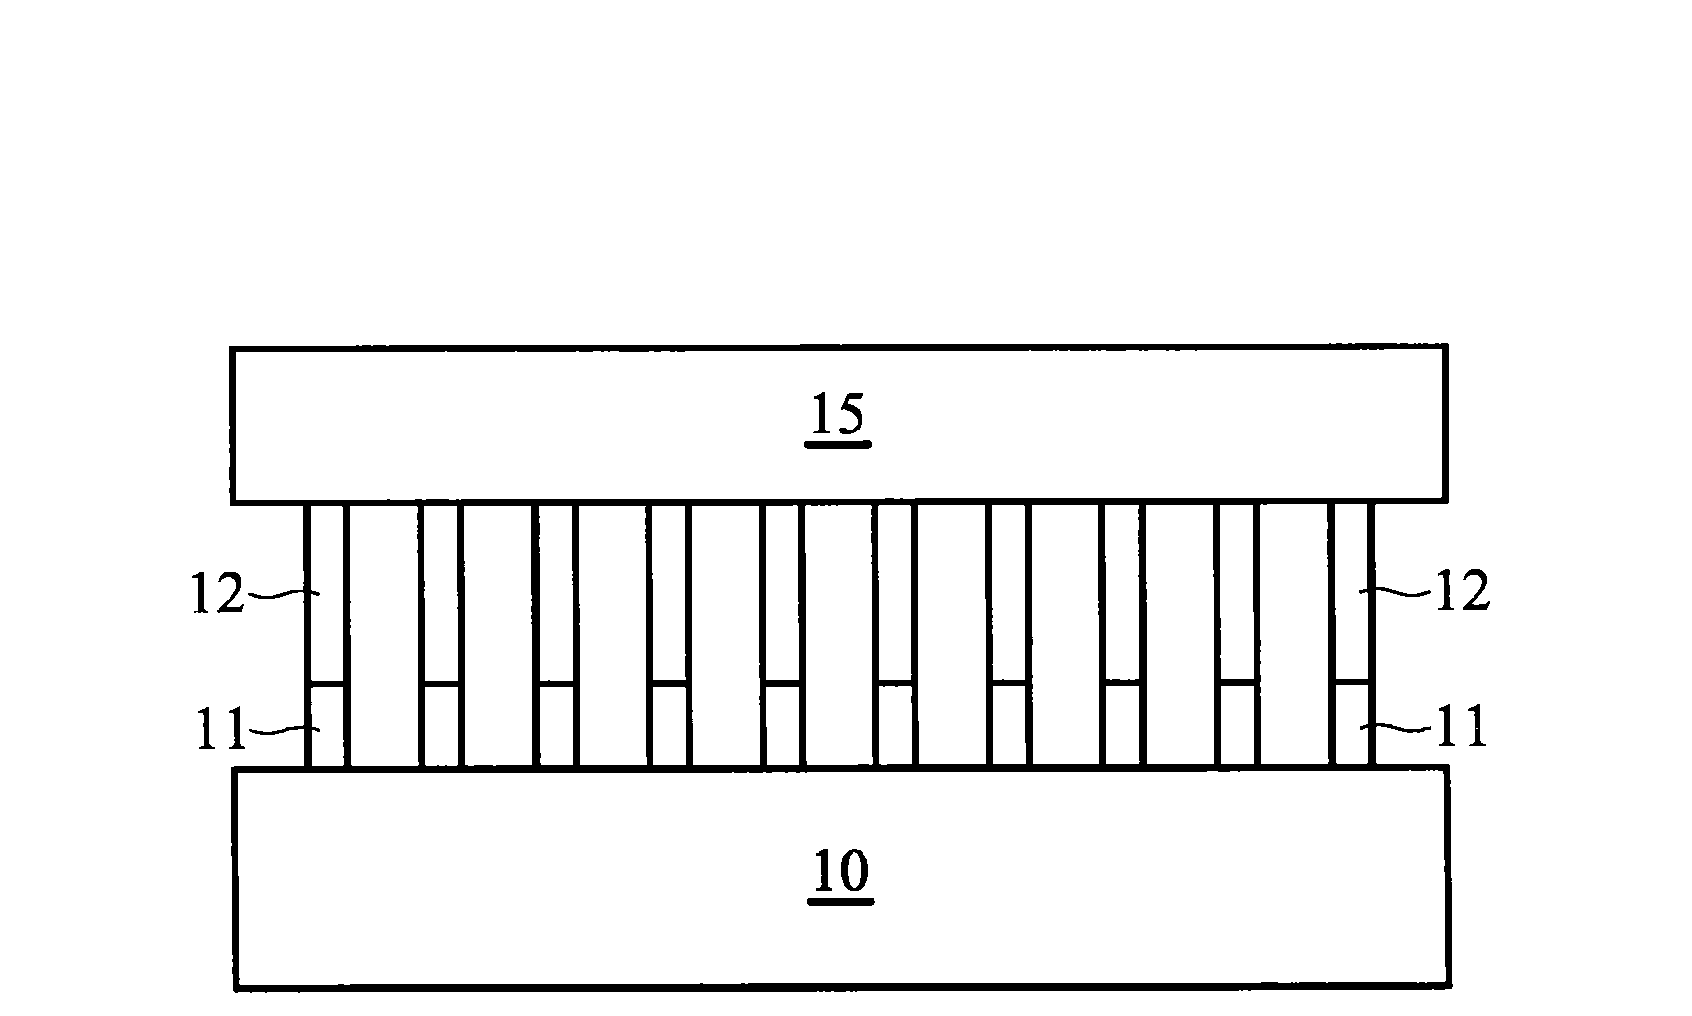 A method of forming a circuit structure